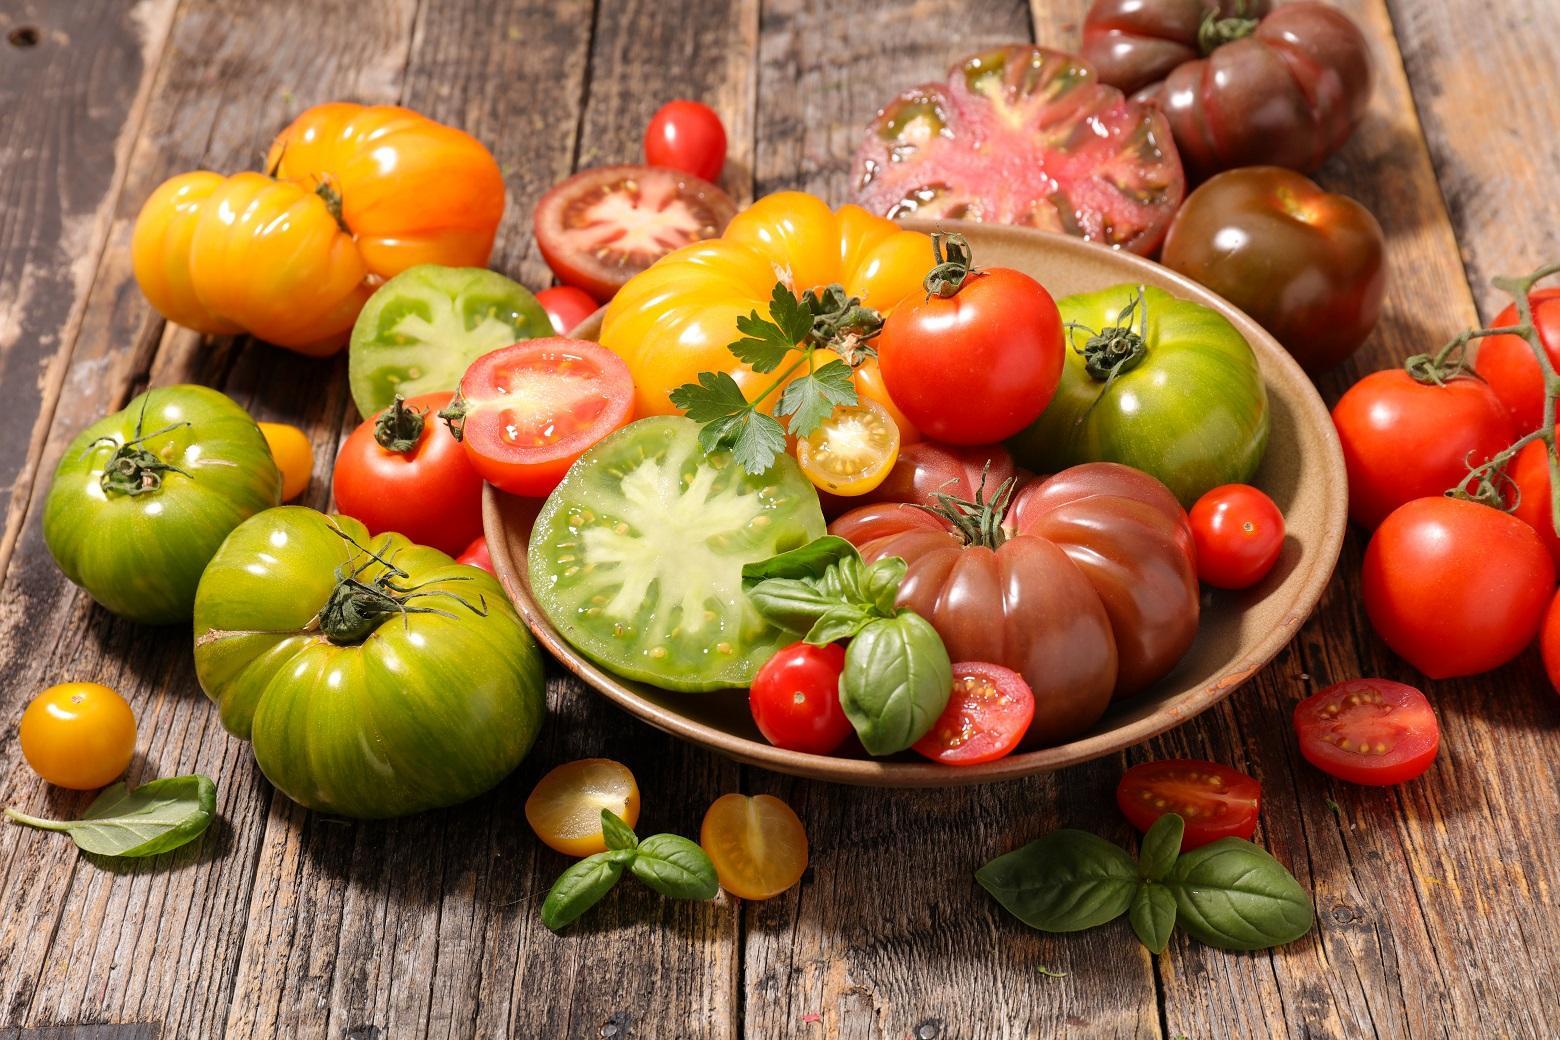 How Sophisticated Is Your Taste in Food? tomatoes1